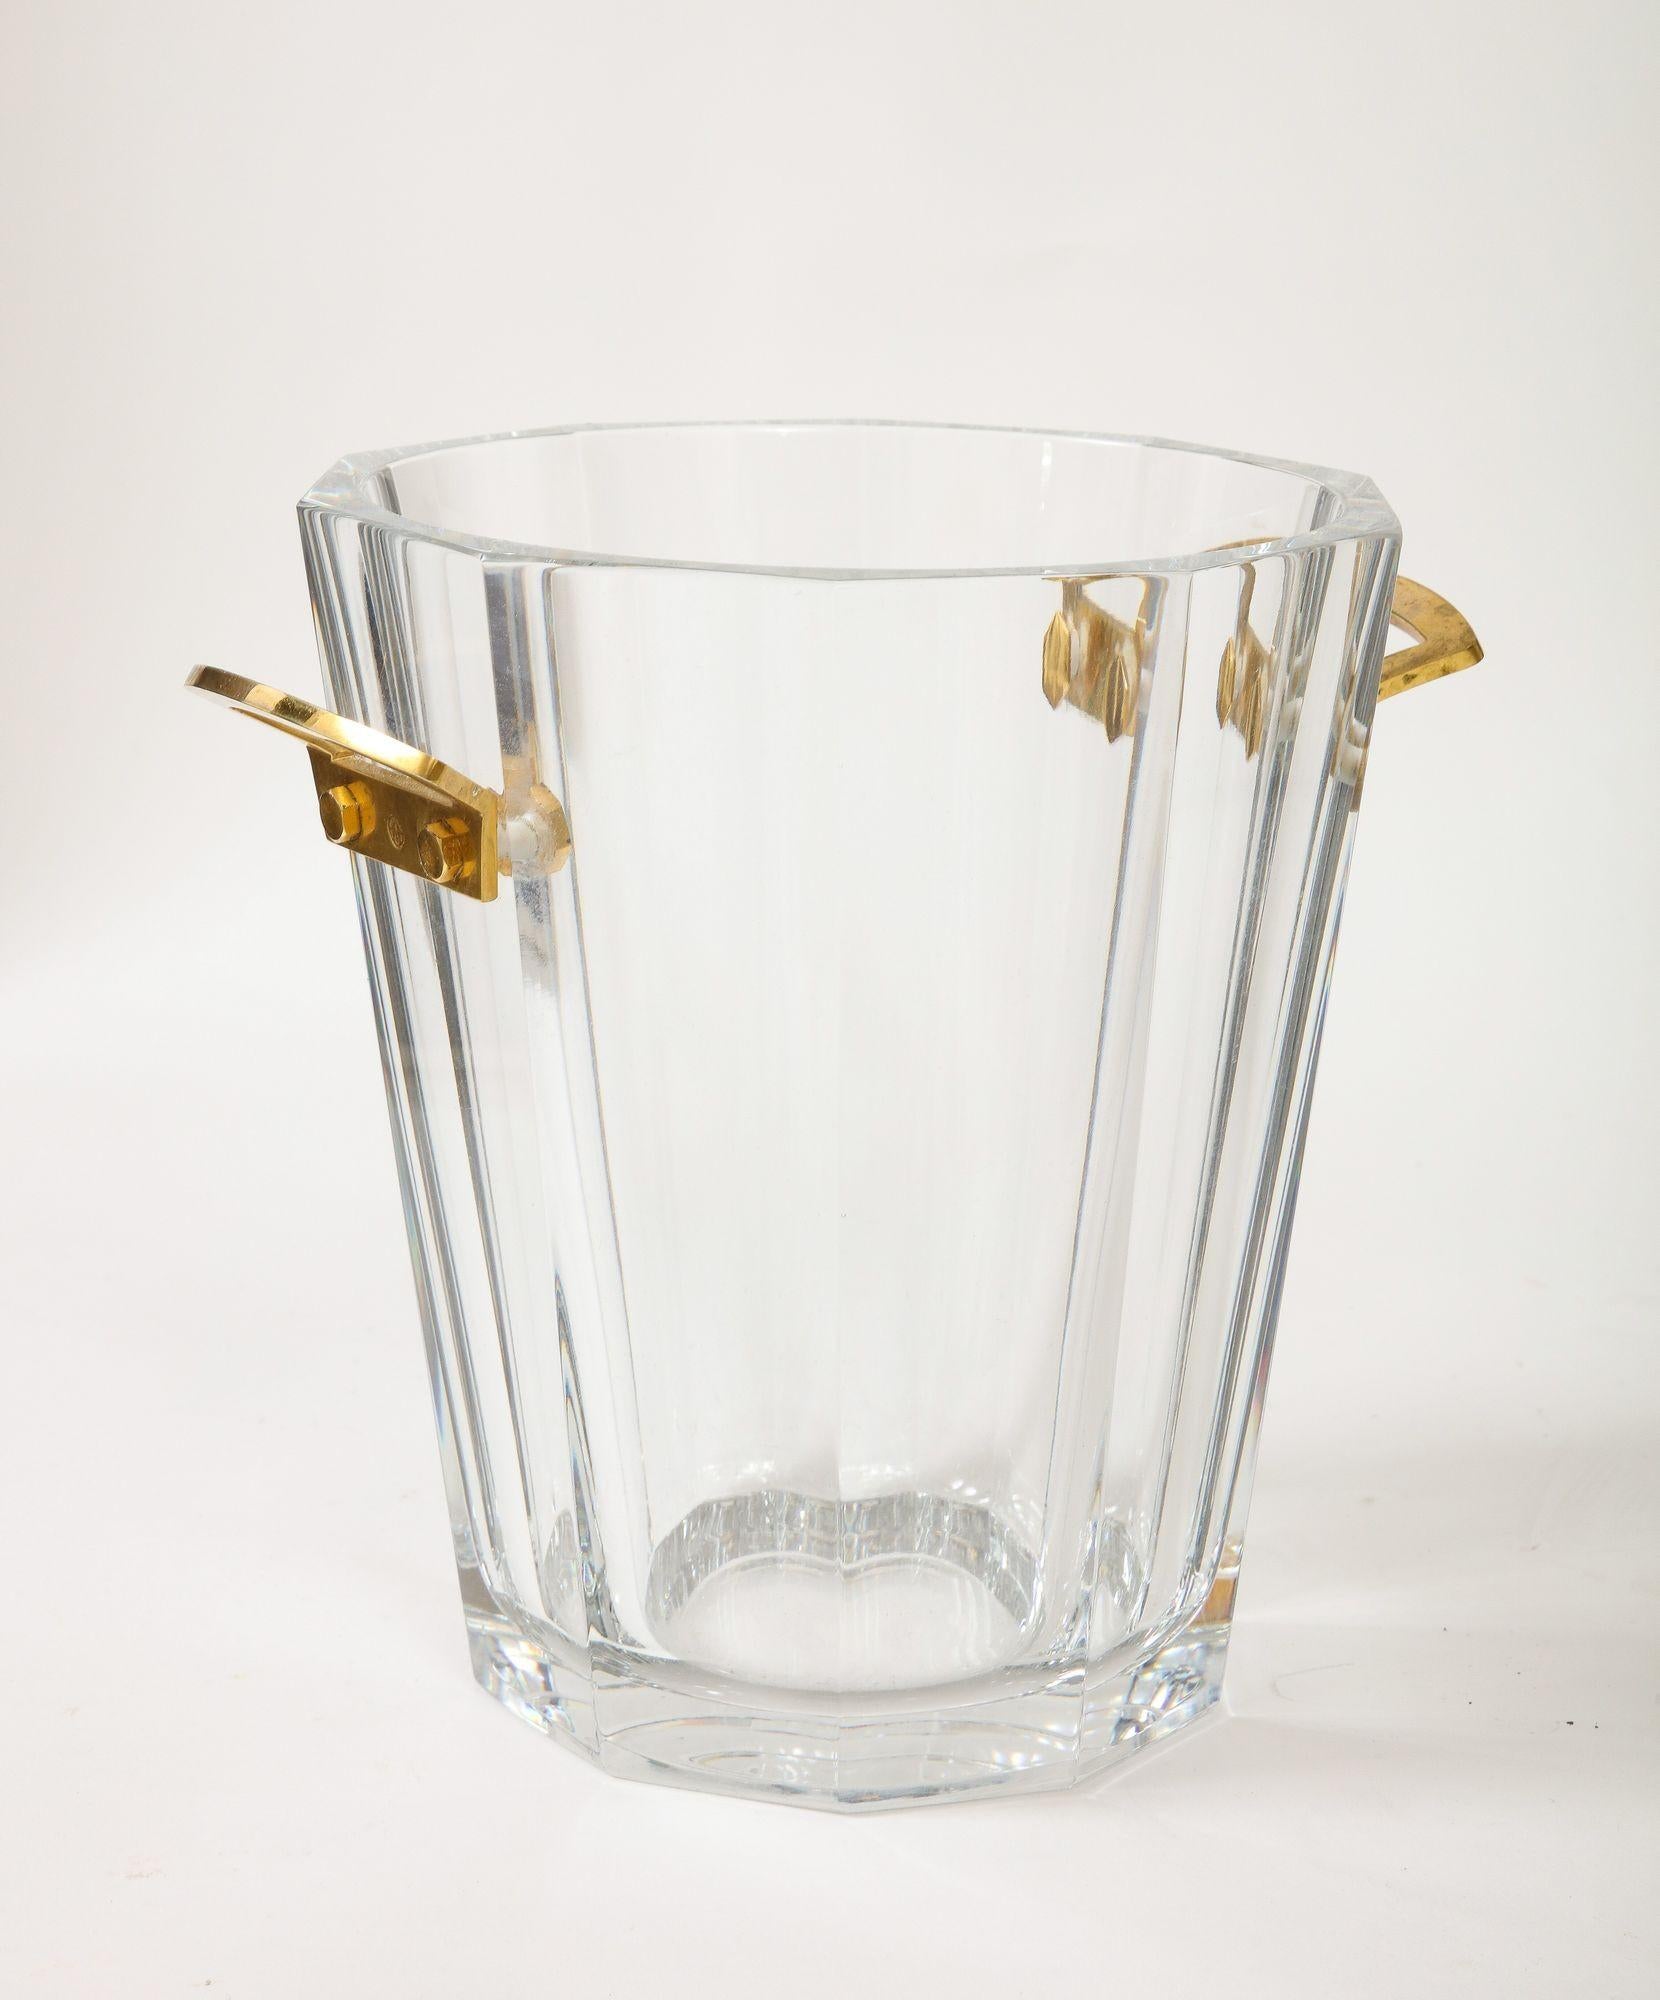 Late 20th Century Baccarat Fluted Crystal Ice Bucket with Gold plated Handles.